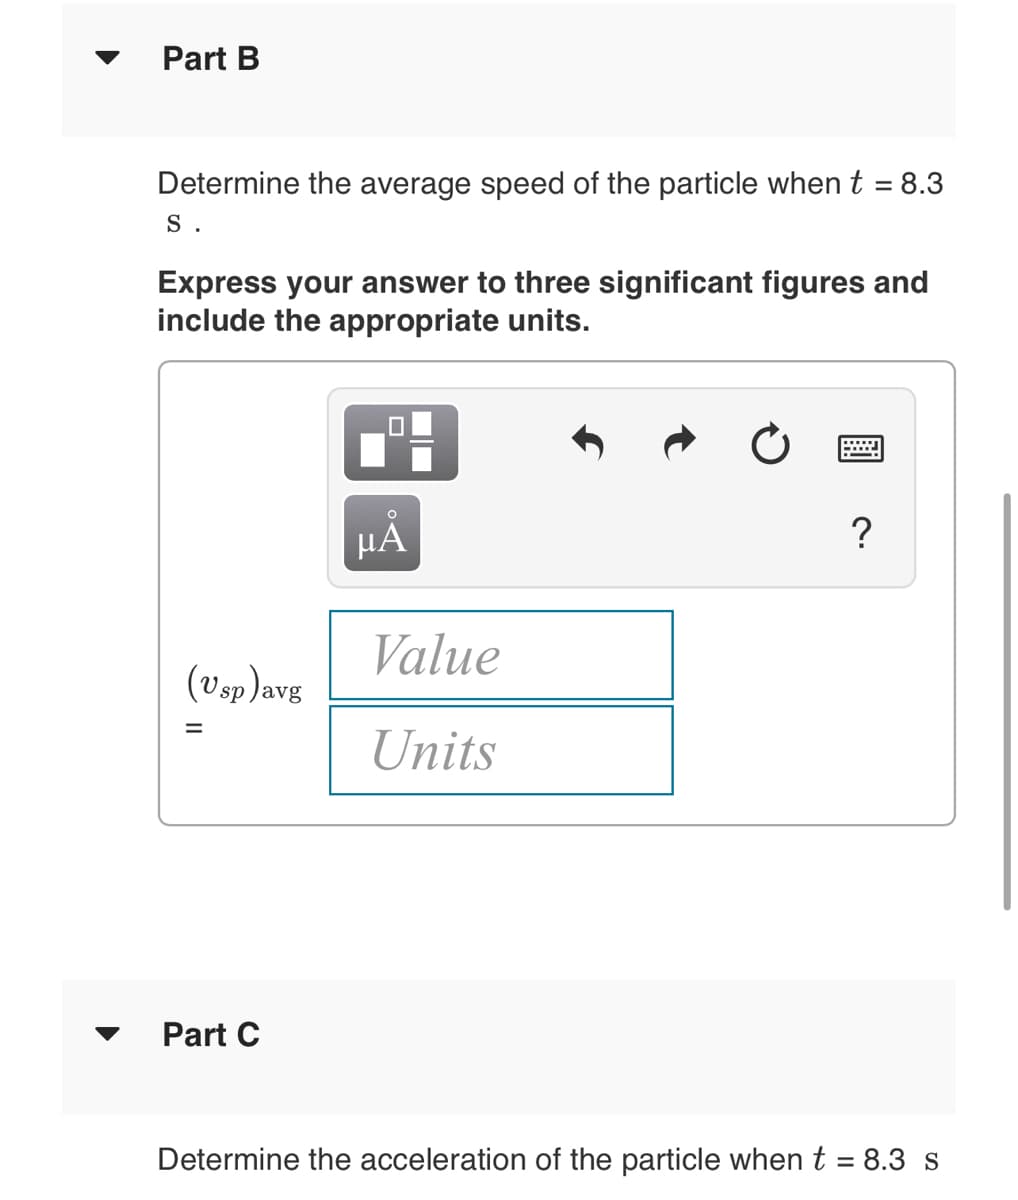 Part B
Determine the average speed of the particle when t = 8.3
S .
Express your answer to three significant figures and
include the appropriate units.
HA
?
Value
(vsp )avg
Units
Part C
Determine the acceleration of the particle when t = 8.3 s
II
